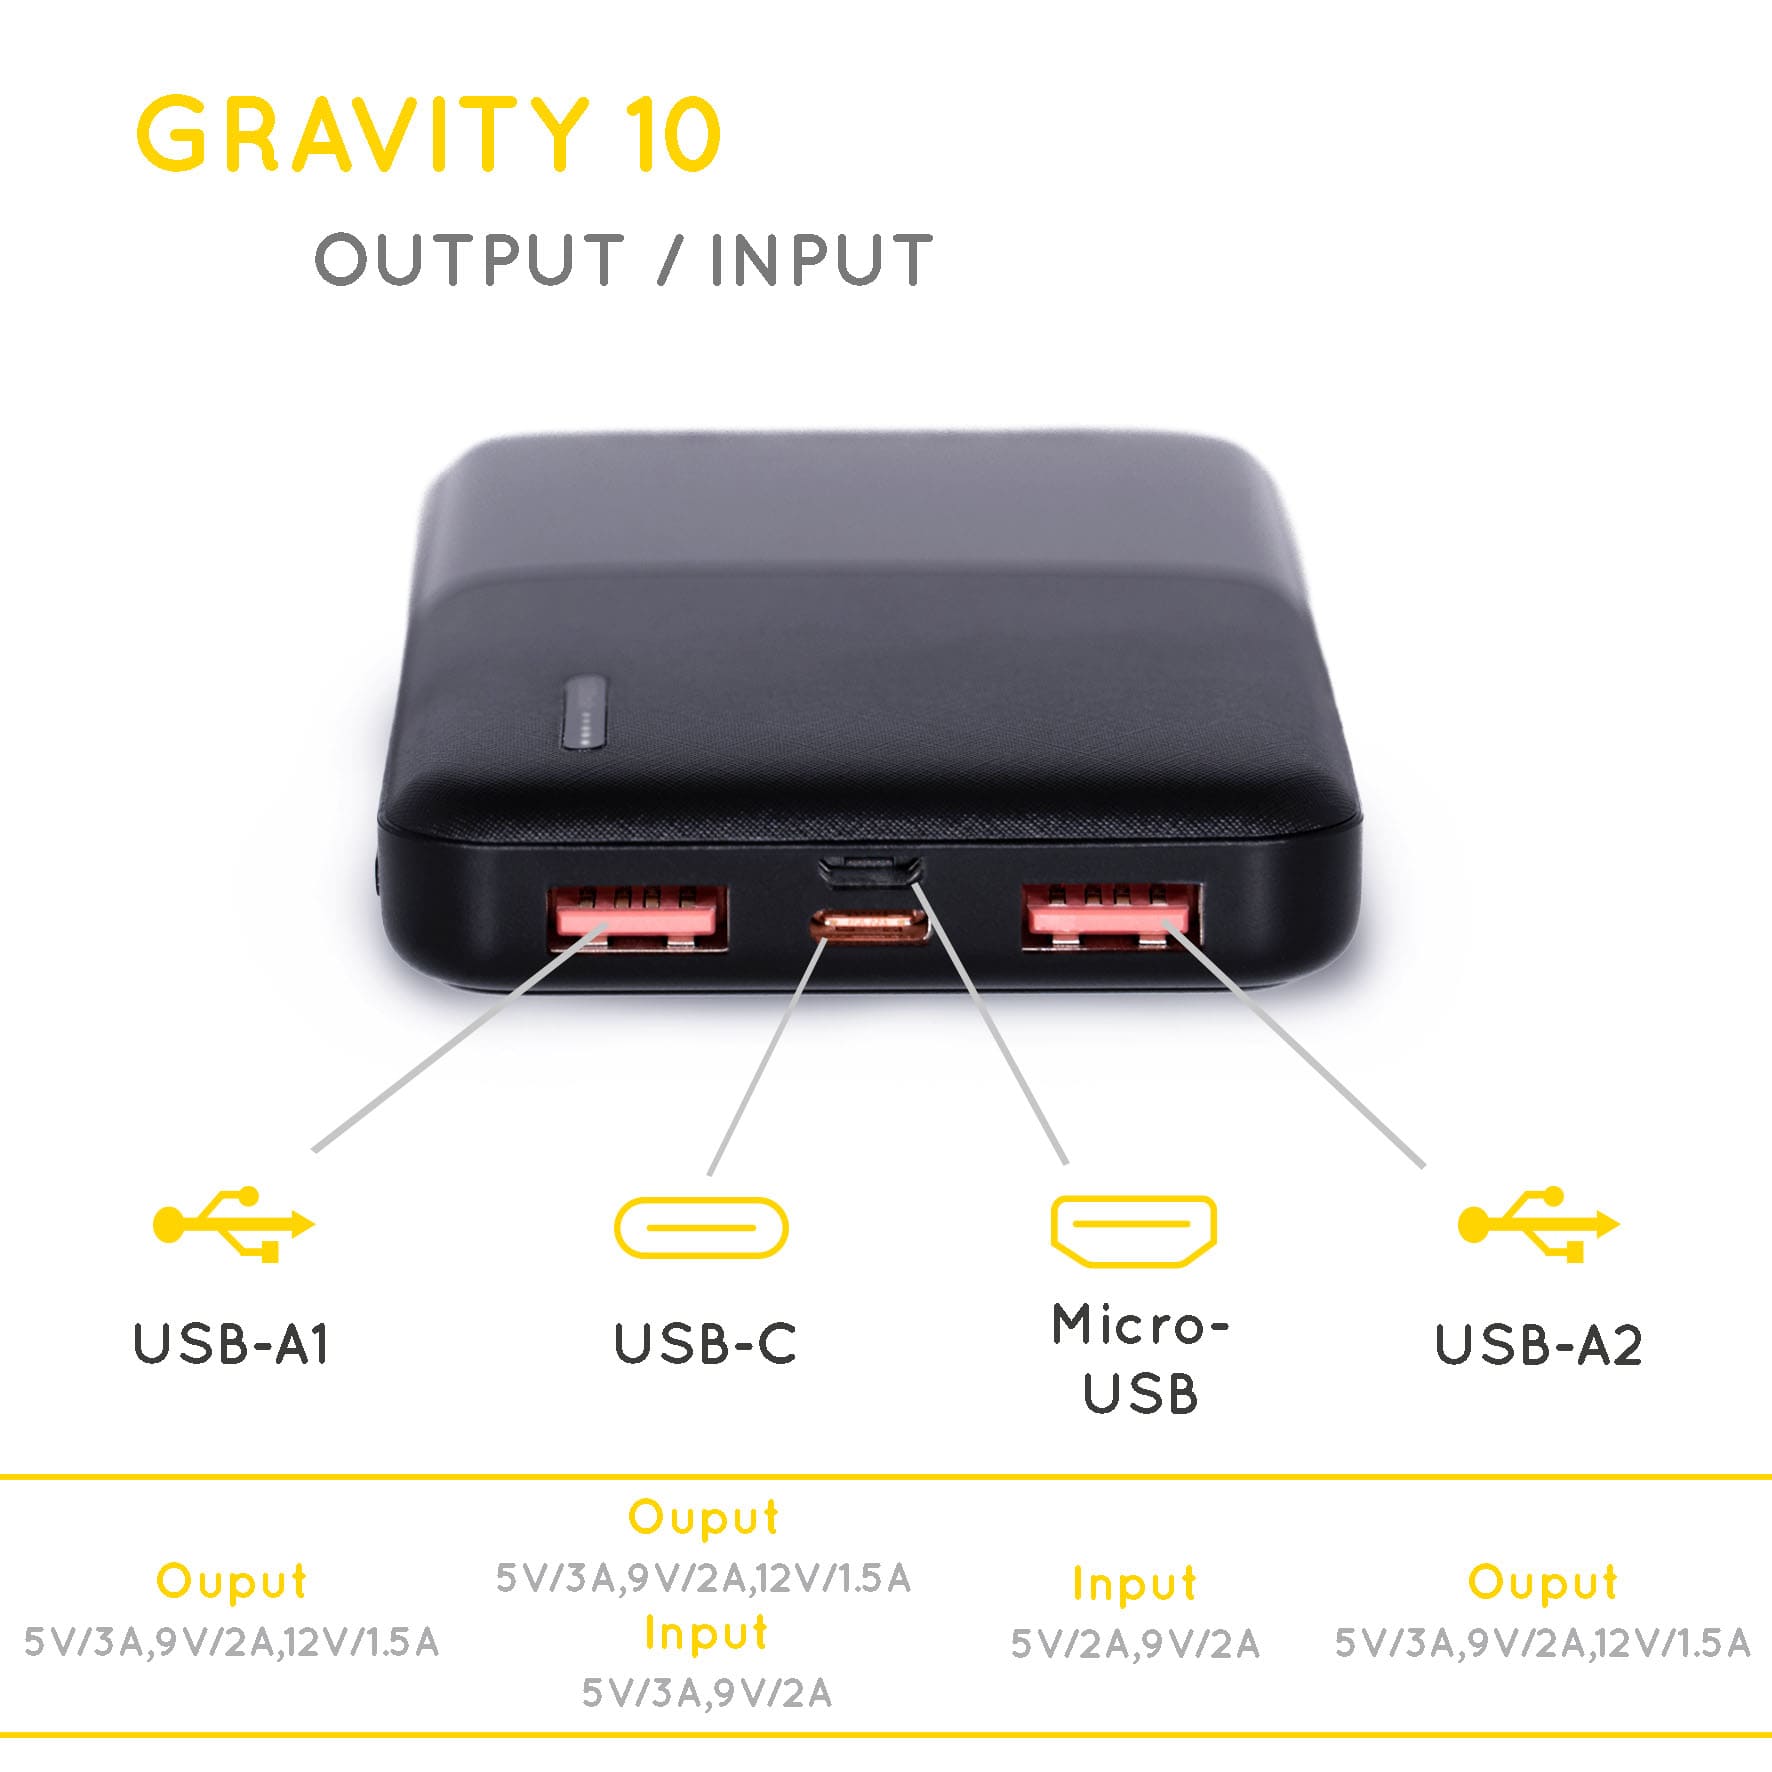 Power bank explanation on the output and input : 2 x USB-A, 1 x USB-C, 1 x Micro_USB